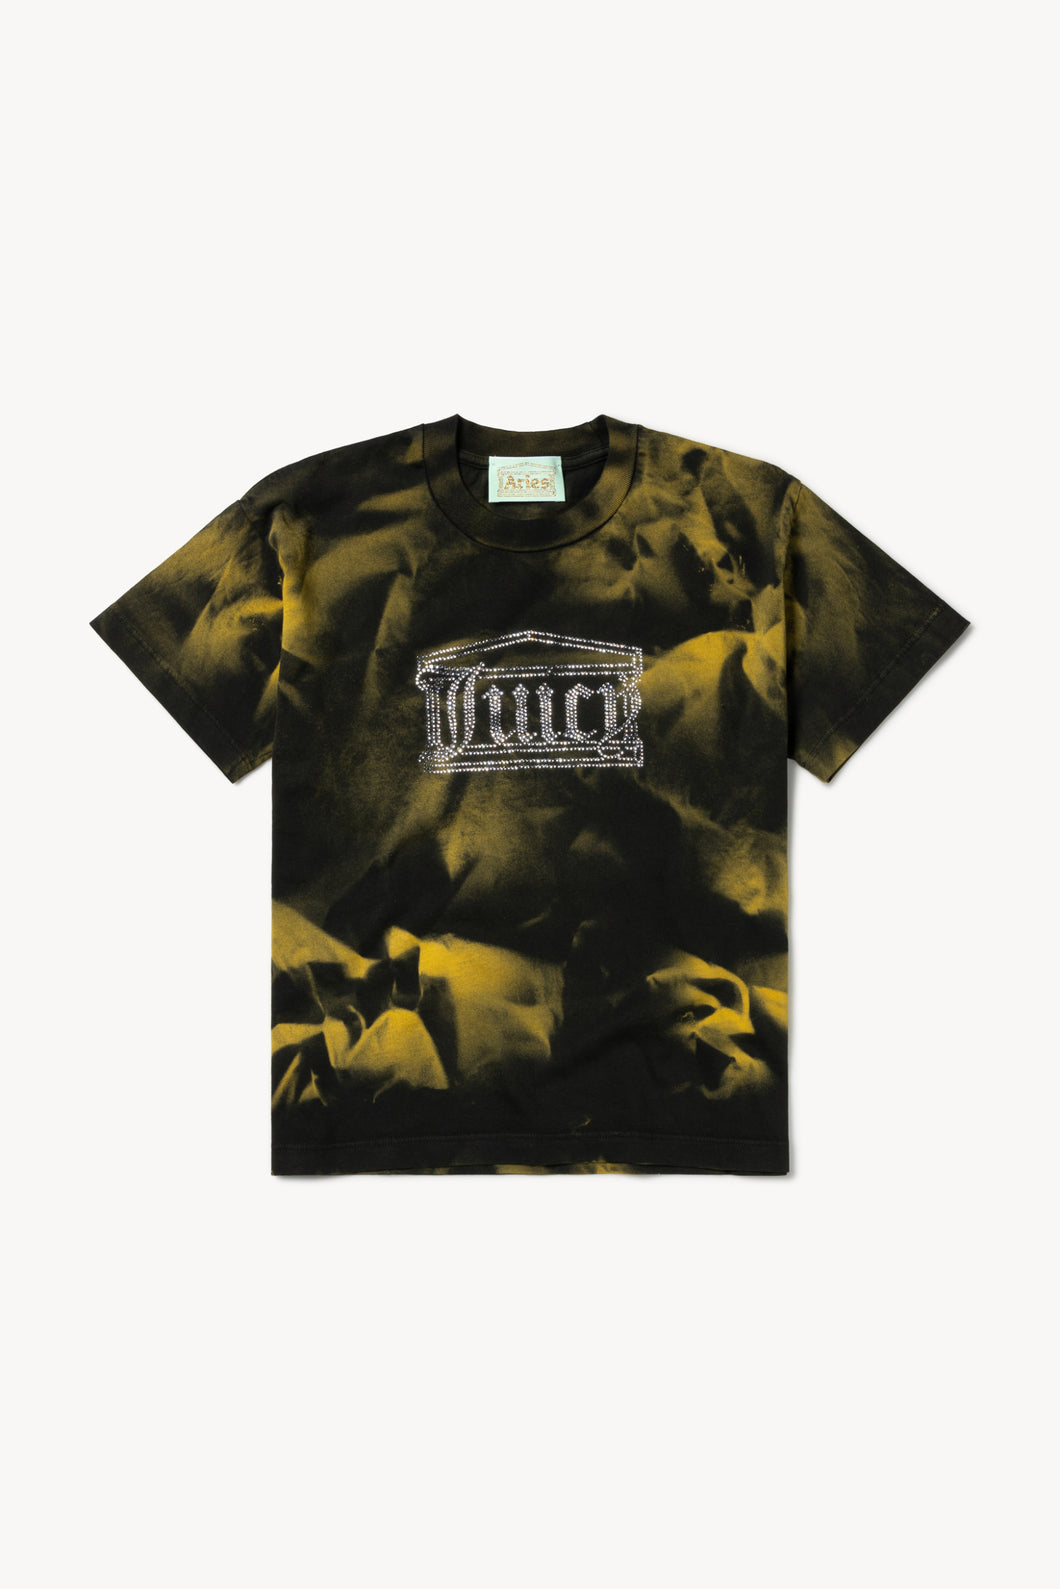 Aries x Juicy Couture Sun-bleached Baby Tee